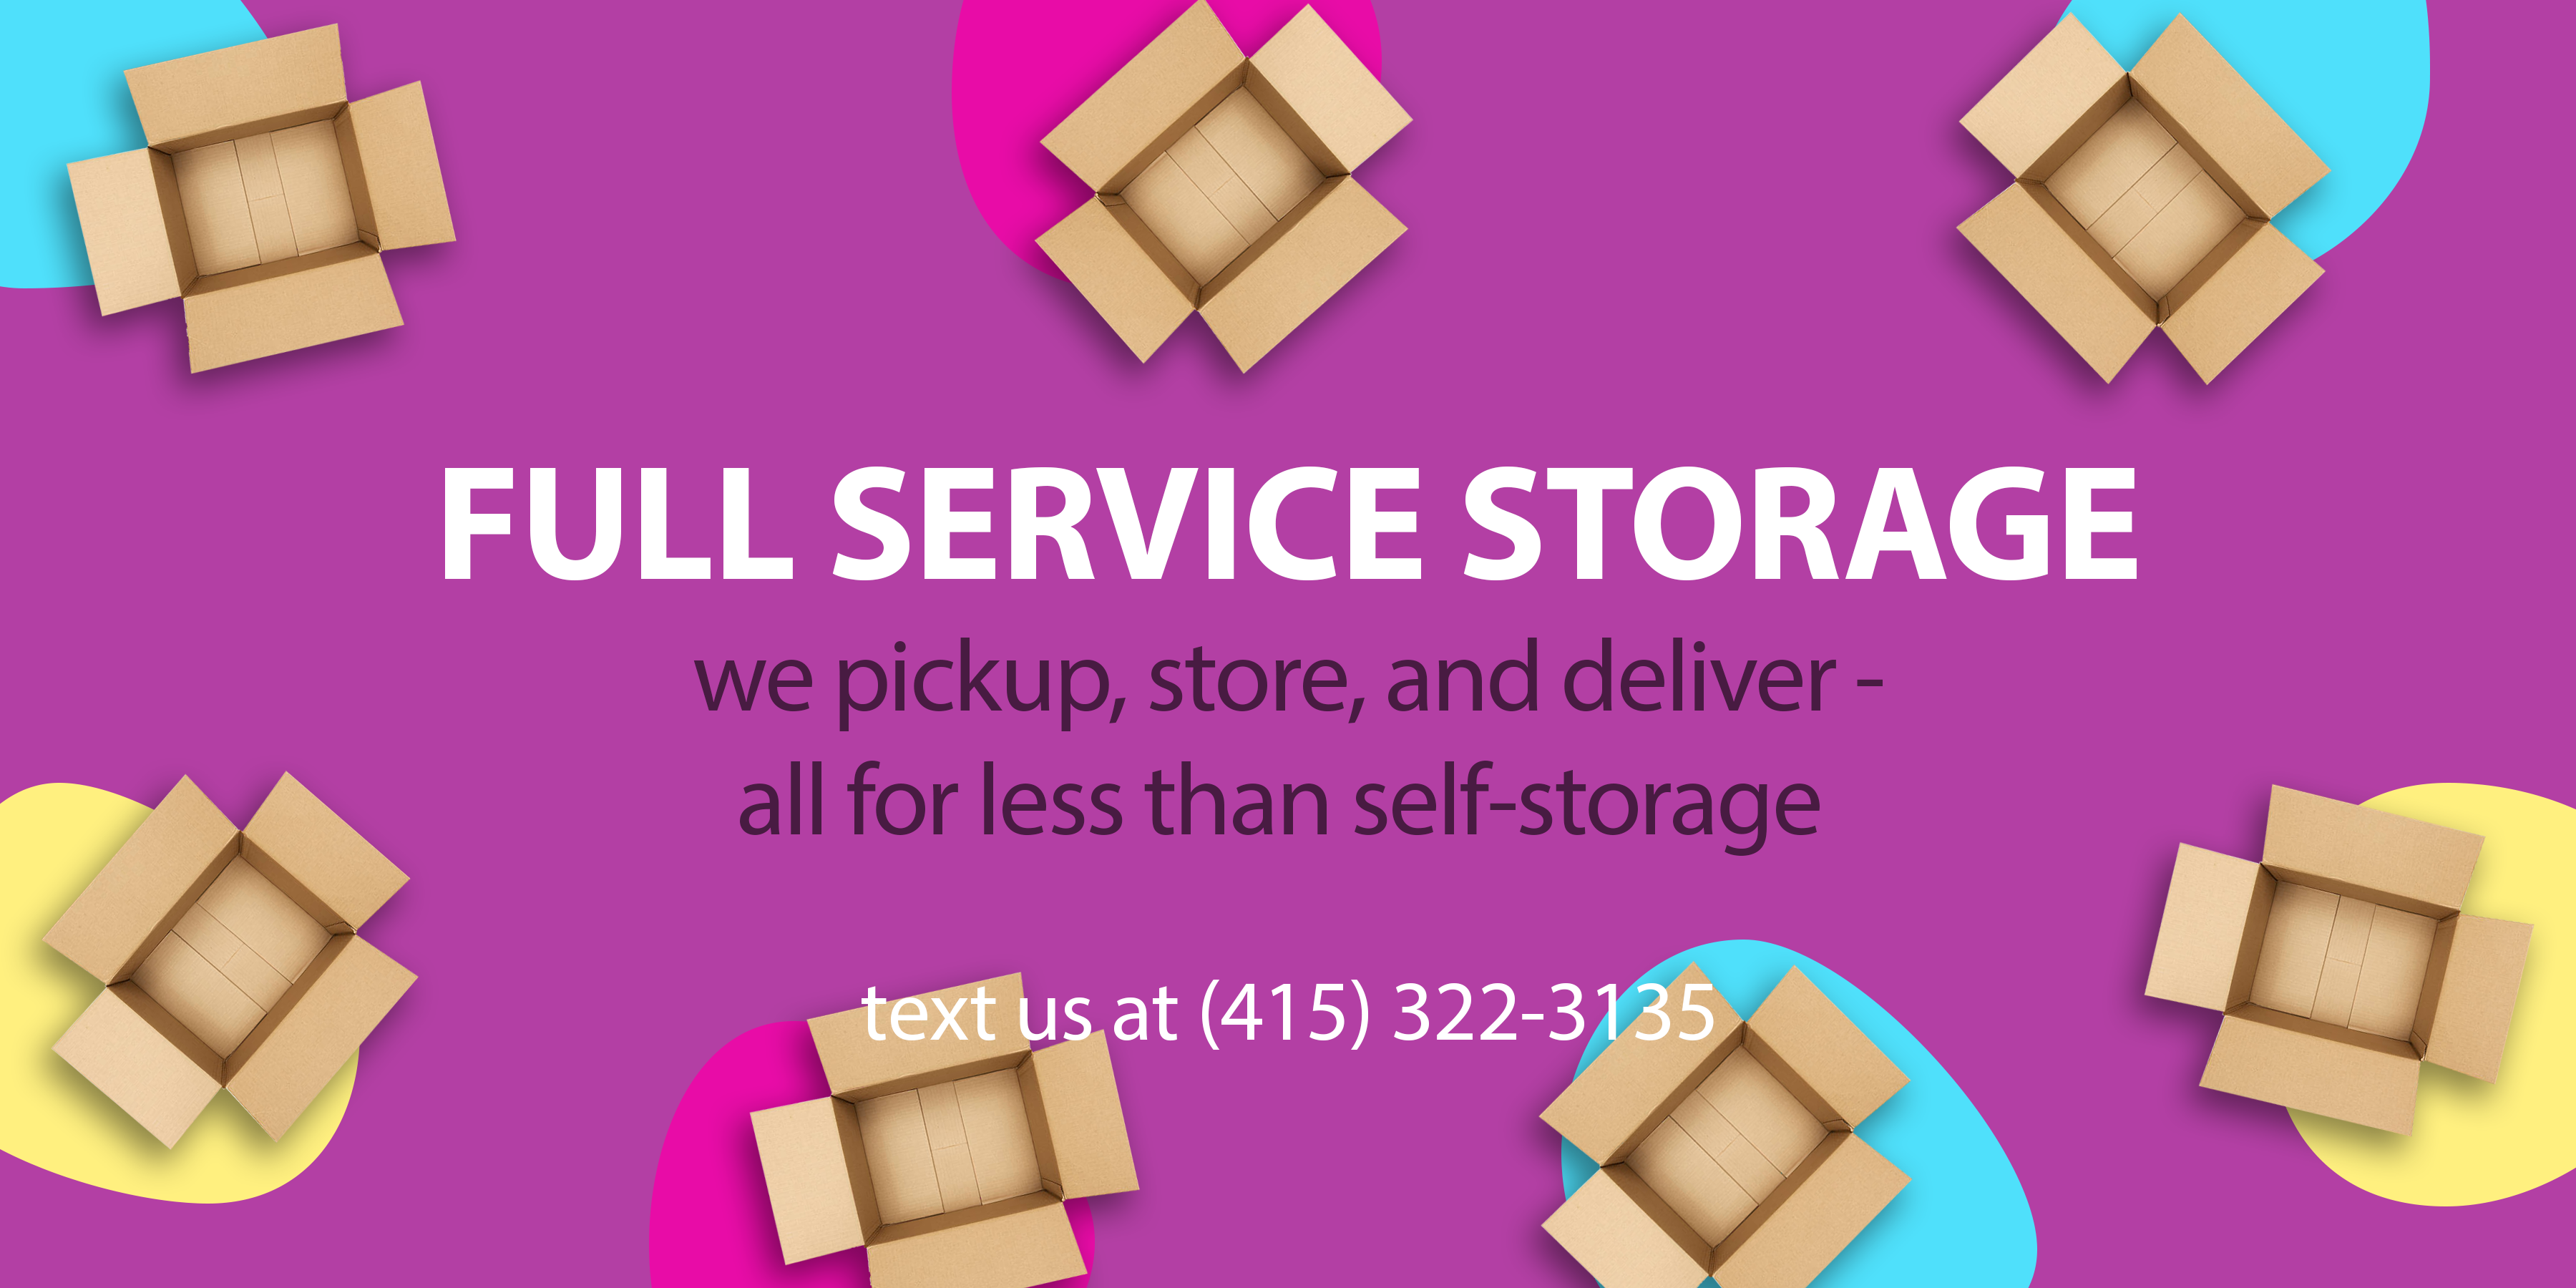 Looking for a moving & storage service company in the San Francisco Bay Area for a great price? ✓ Learn how Boombox self-storage can help you!